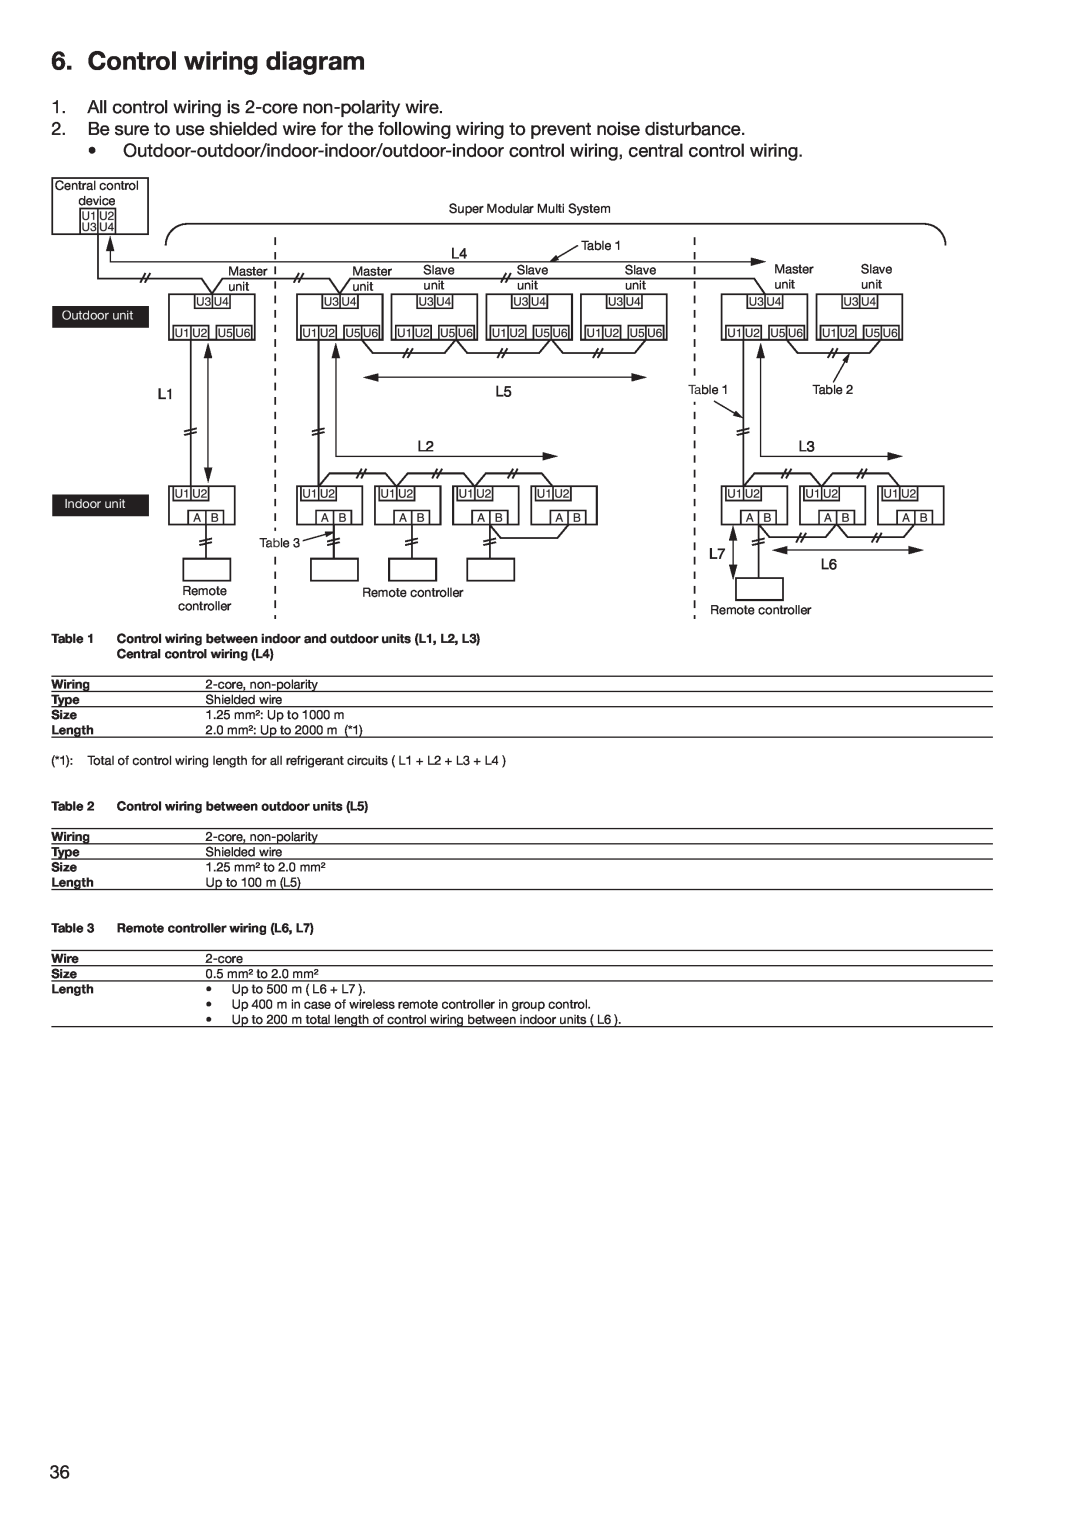 Toshiba HFC R-410A manual Control wiring diagram, All control wiring is 2-core non-polaritywire, Outdoor unit, Indoor unit 